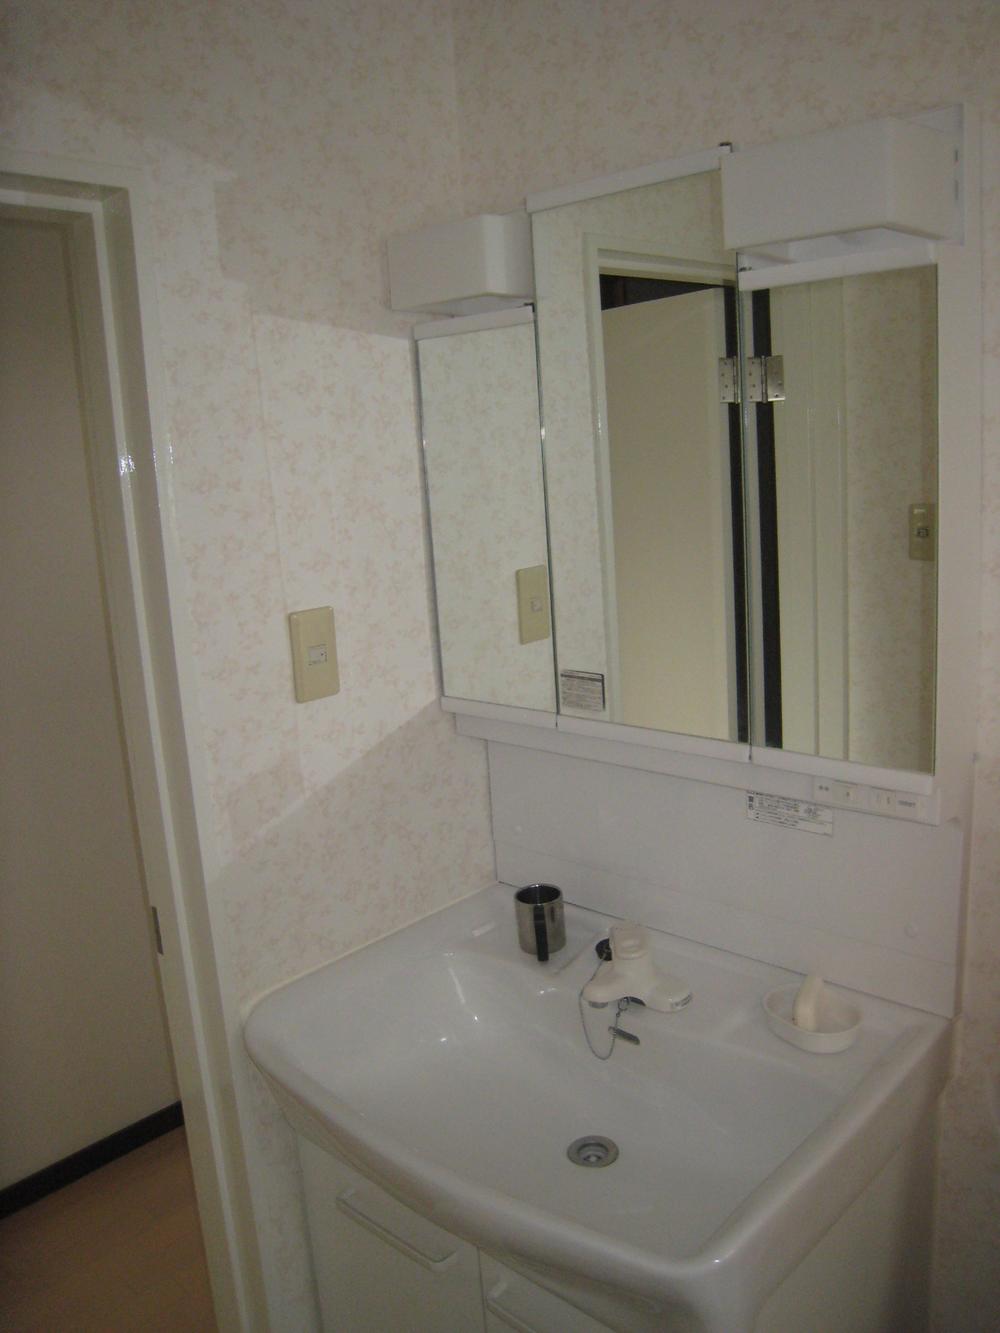 Wash basin, toilet. Bathroom vanity. Heisei 23 October exchange already. The back of the mirror has become the storage.